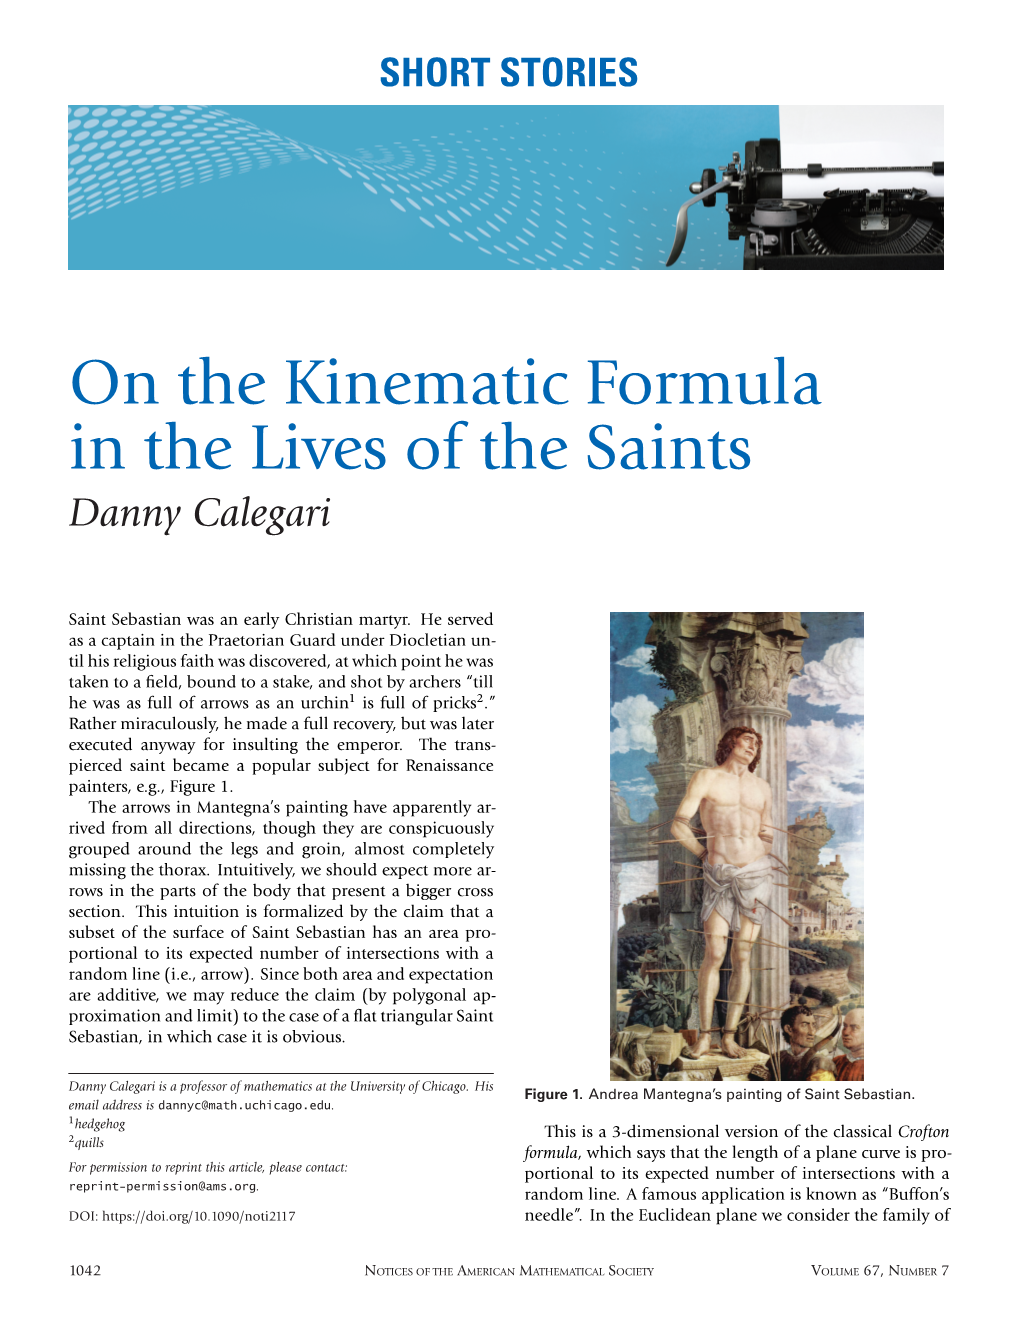 On the Kinematic Formula in the Lives of the Saints Danny Calegari